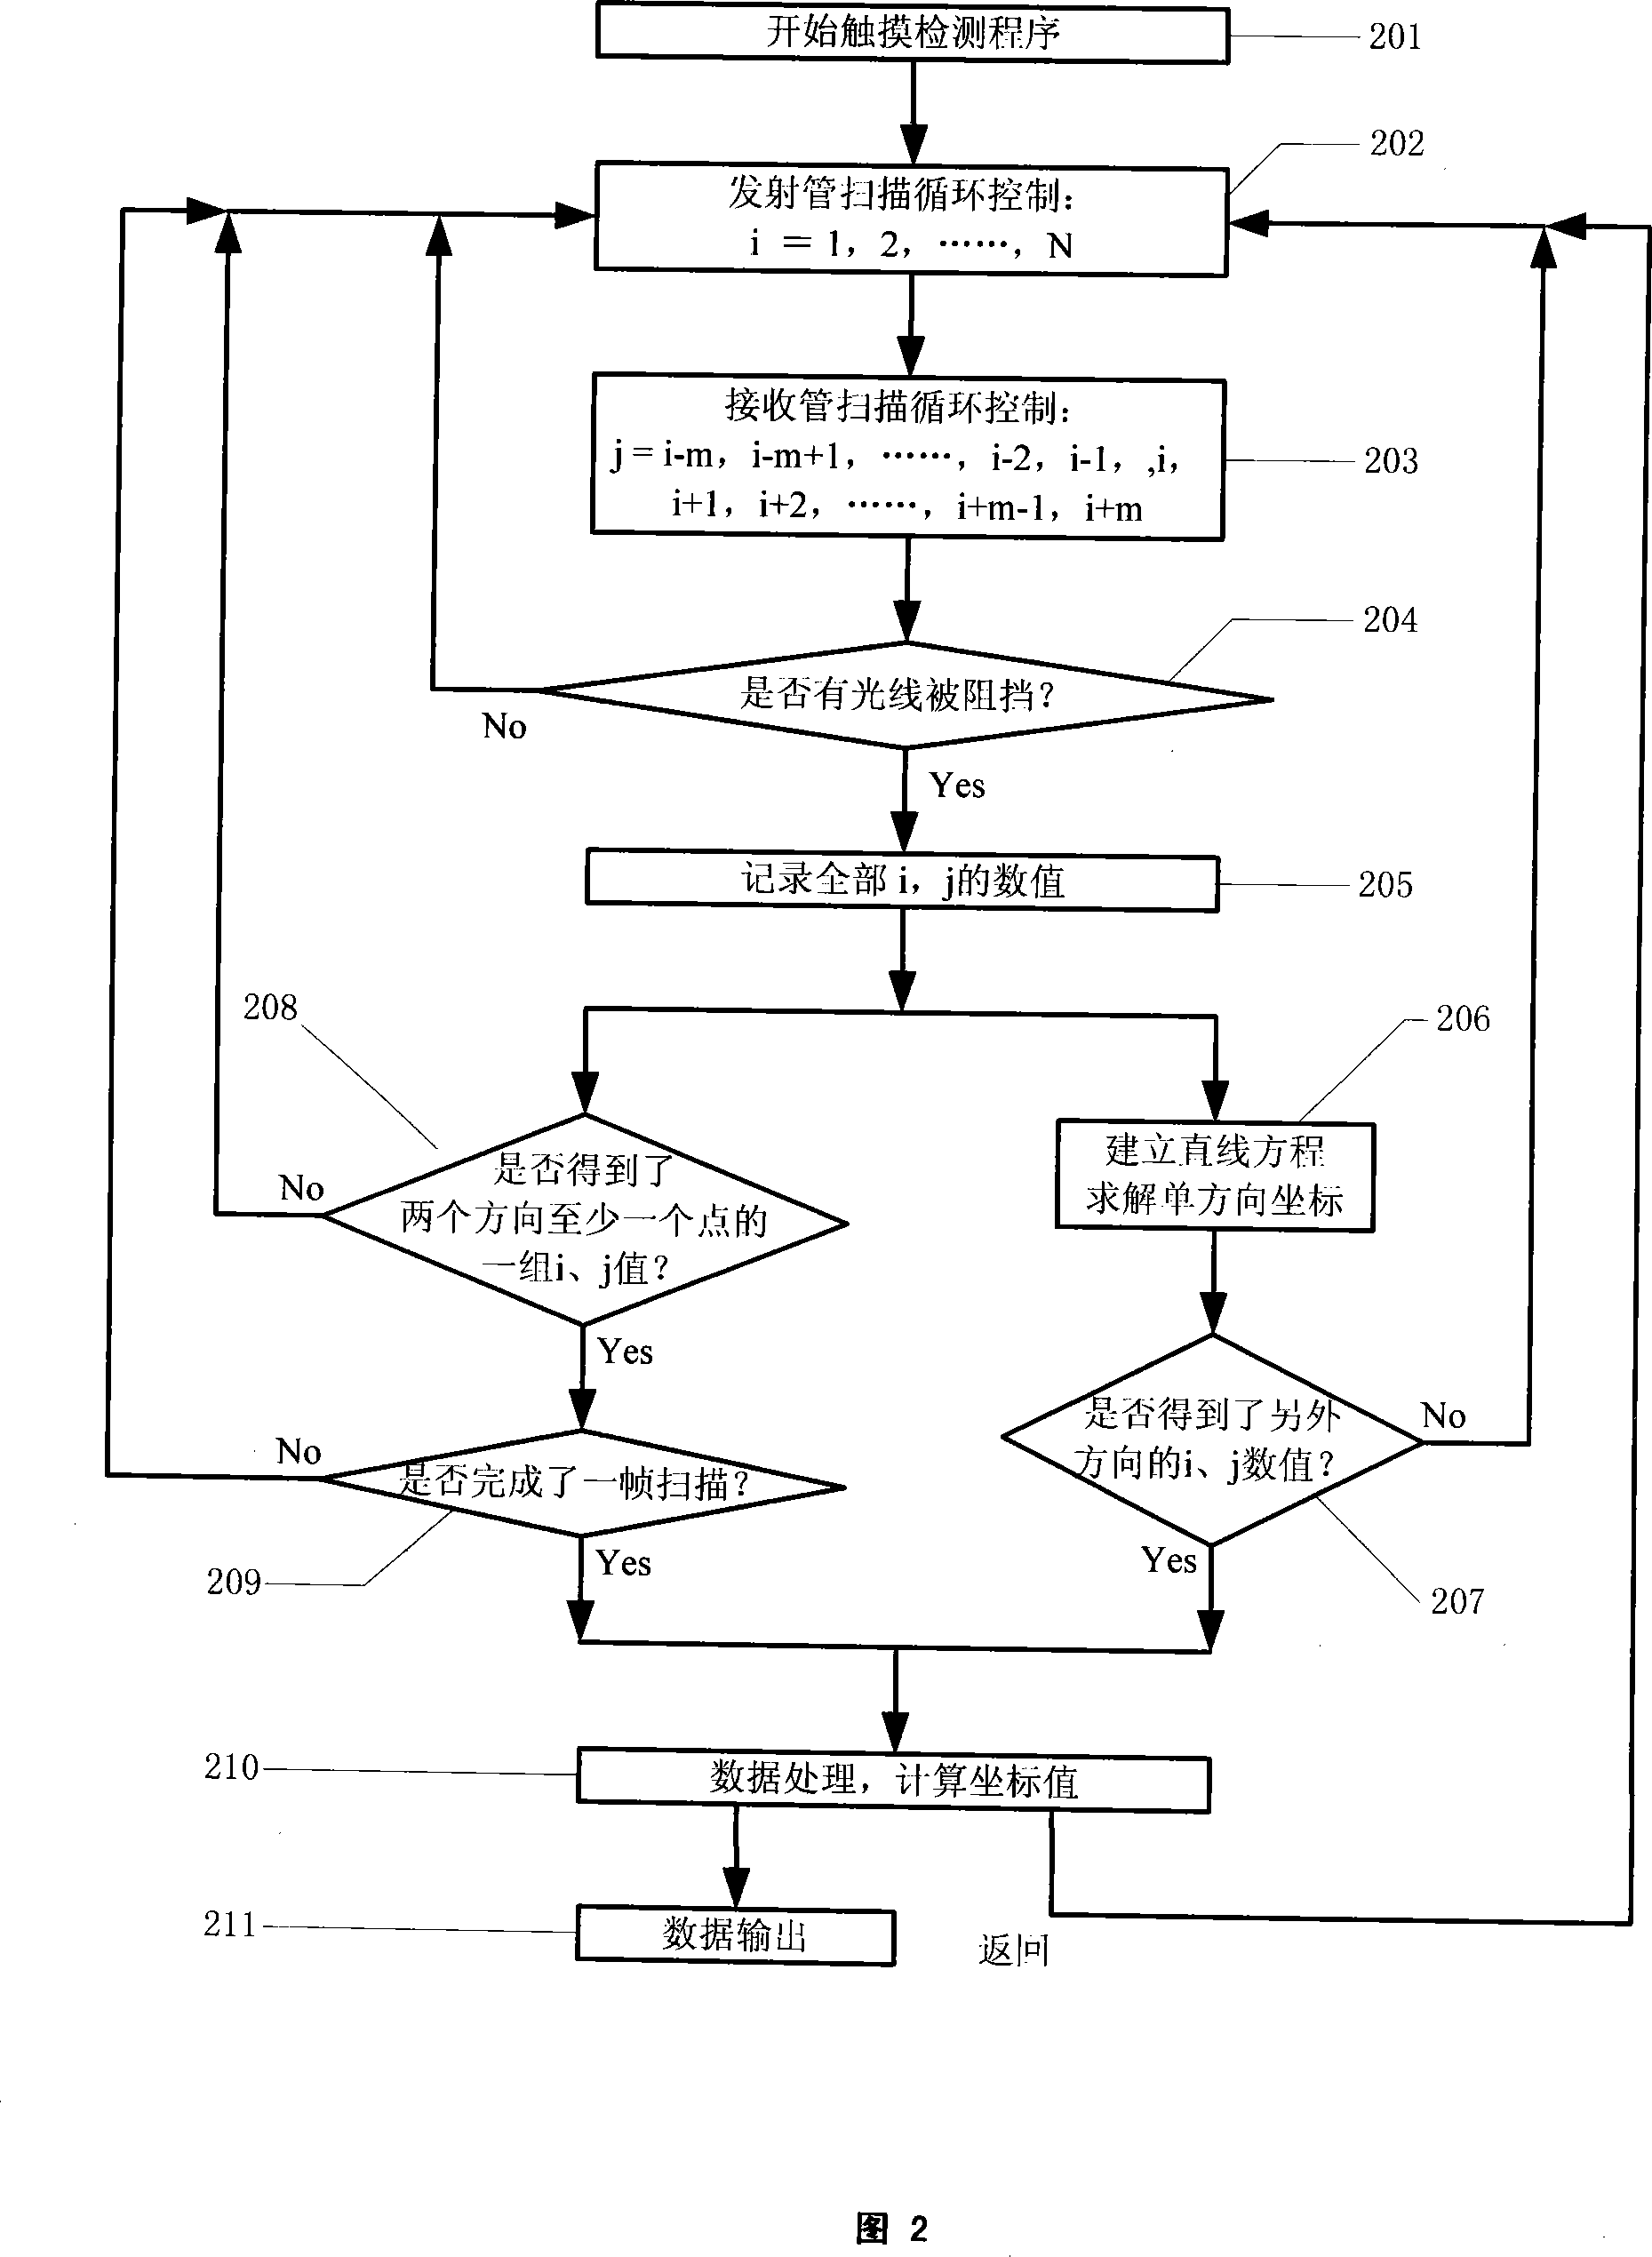 Method for discriminating multiple points on infrared touch screen